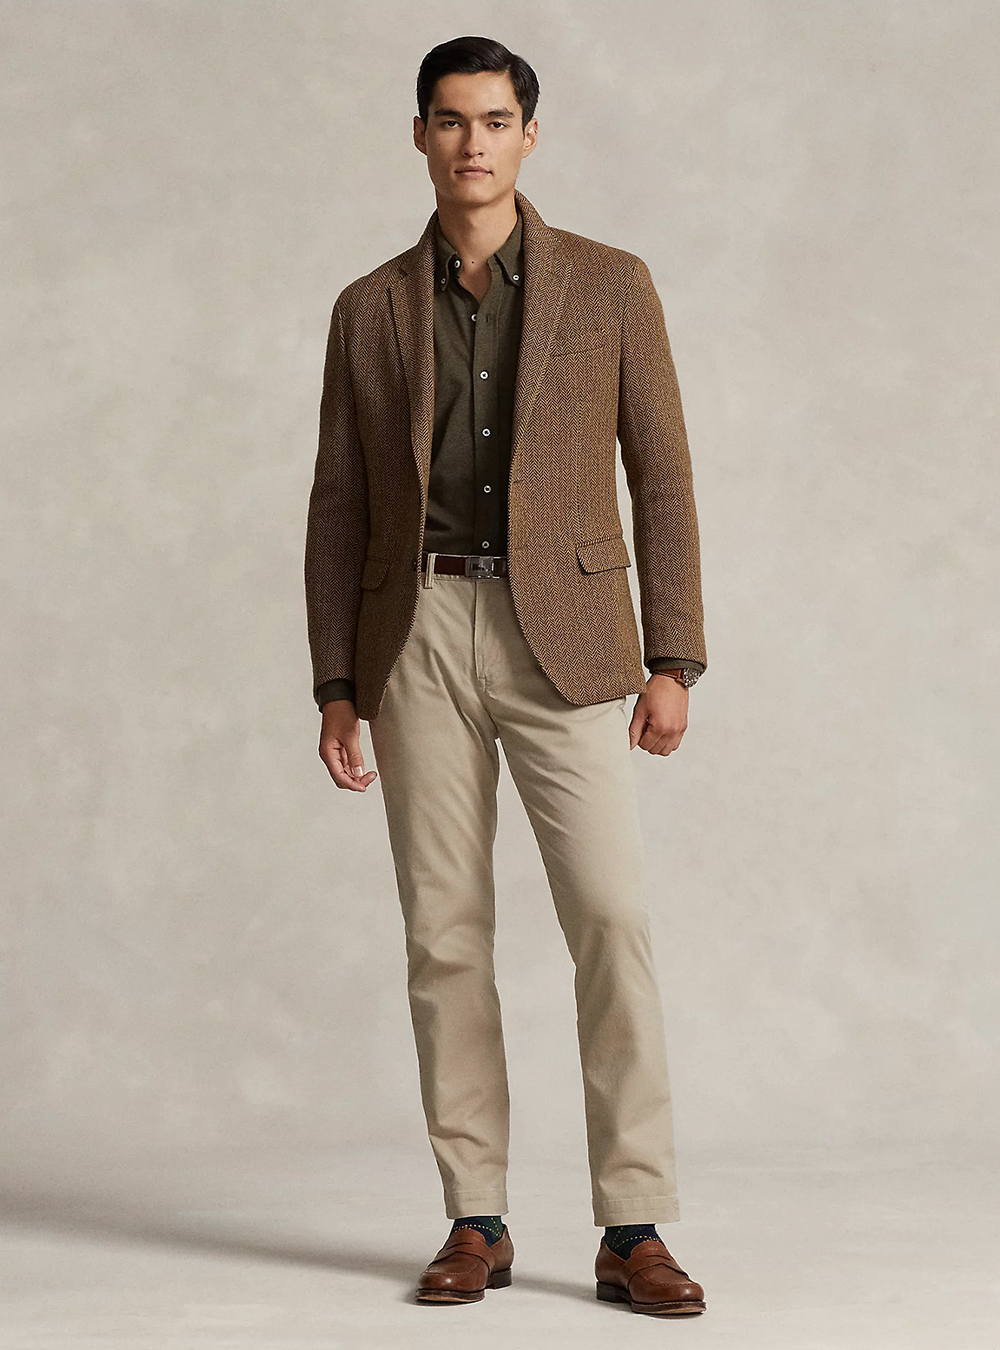 5 Brown Trousers Outfits We're Copying This Winter | Who What Wear